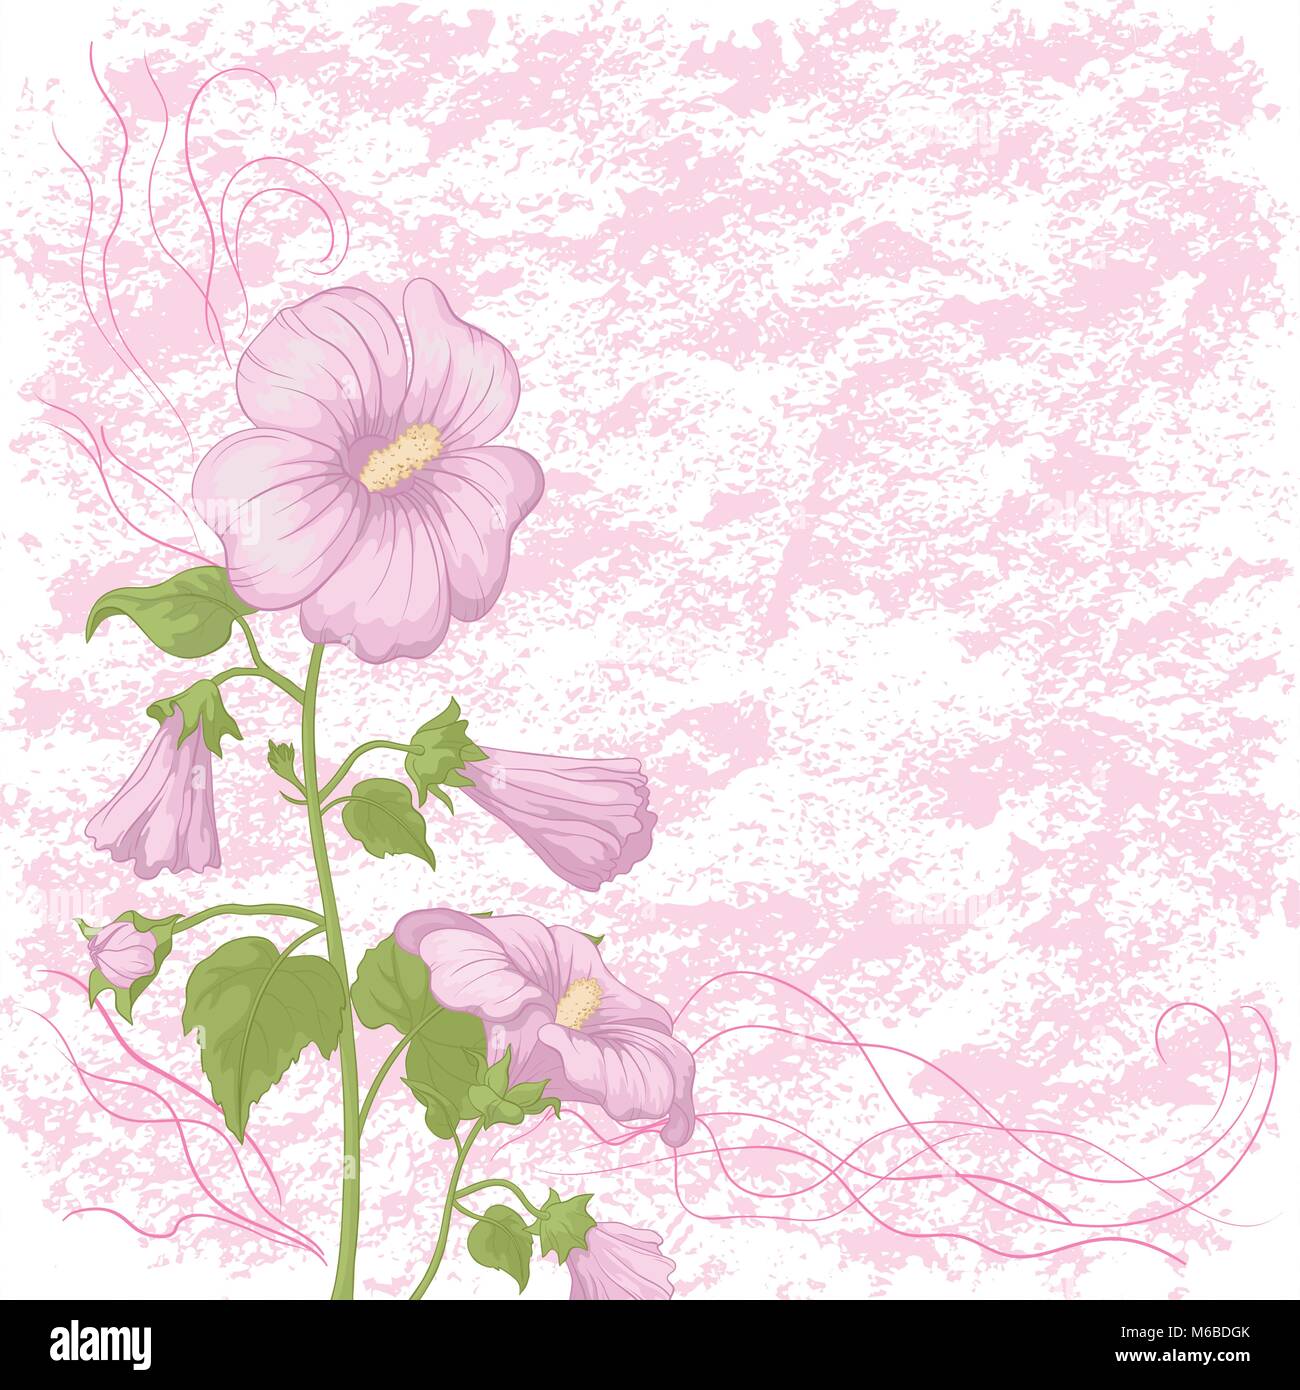 Holiday background with mallow flowers Stock Vector